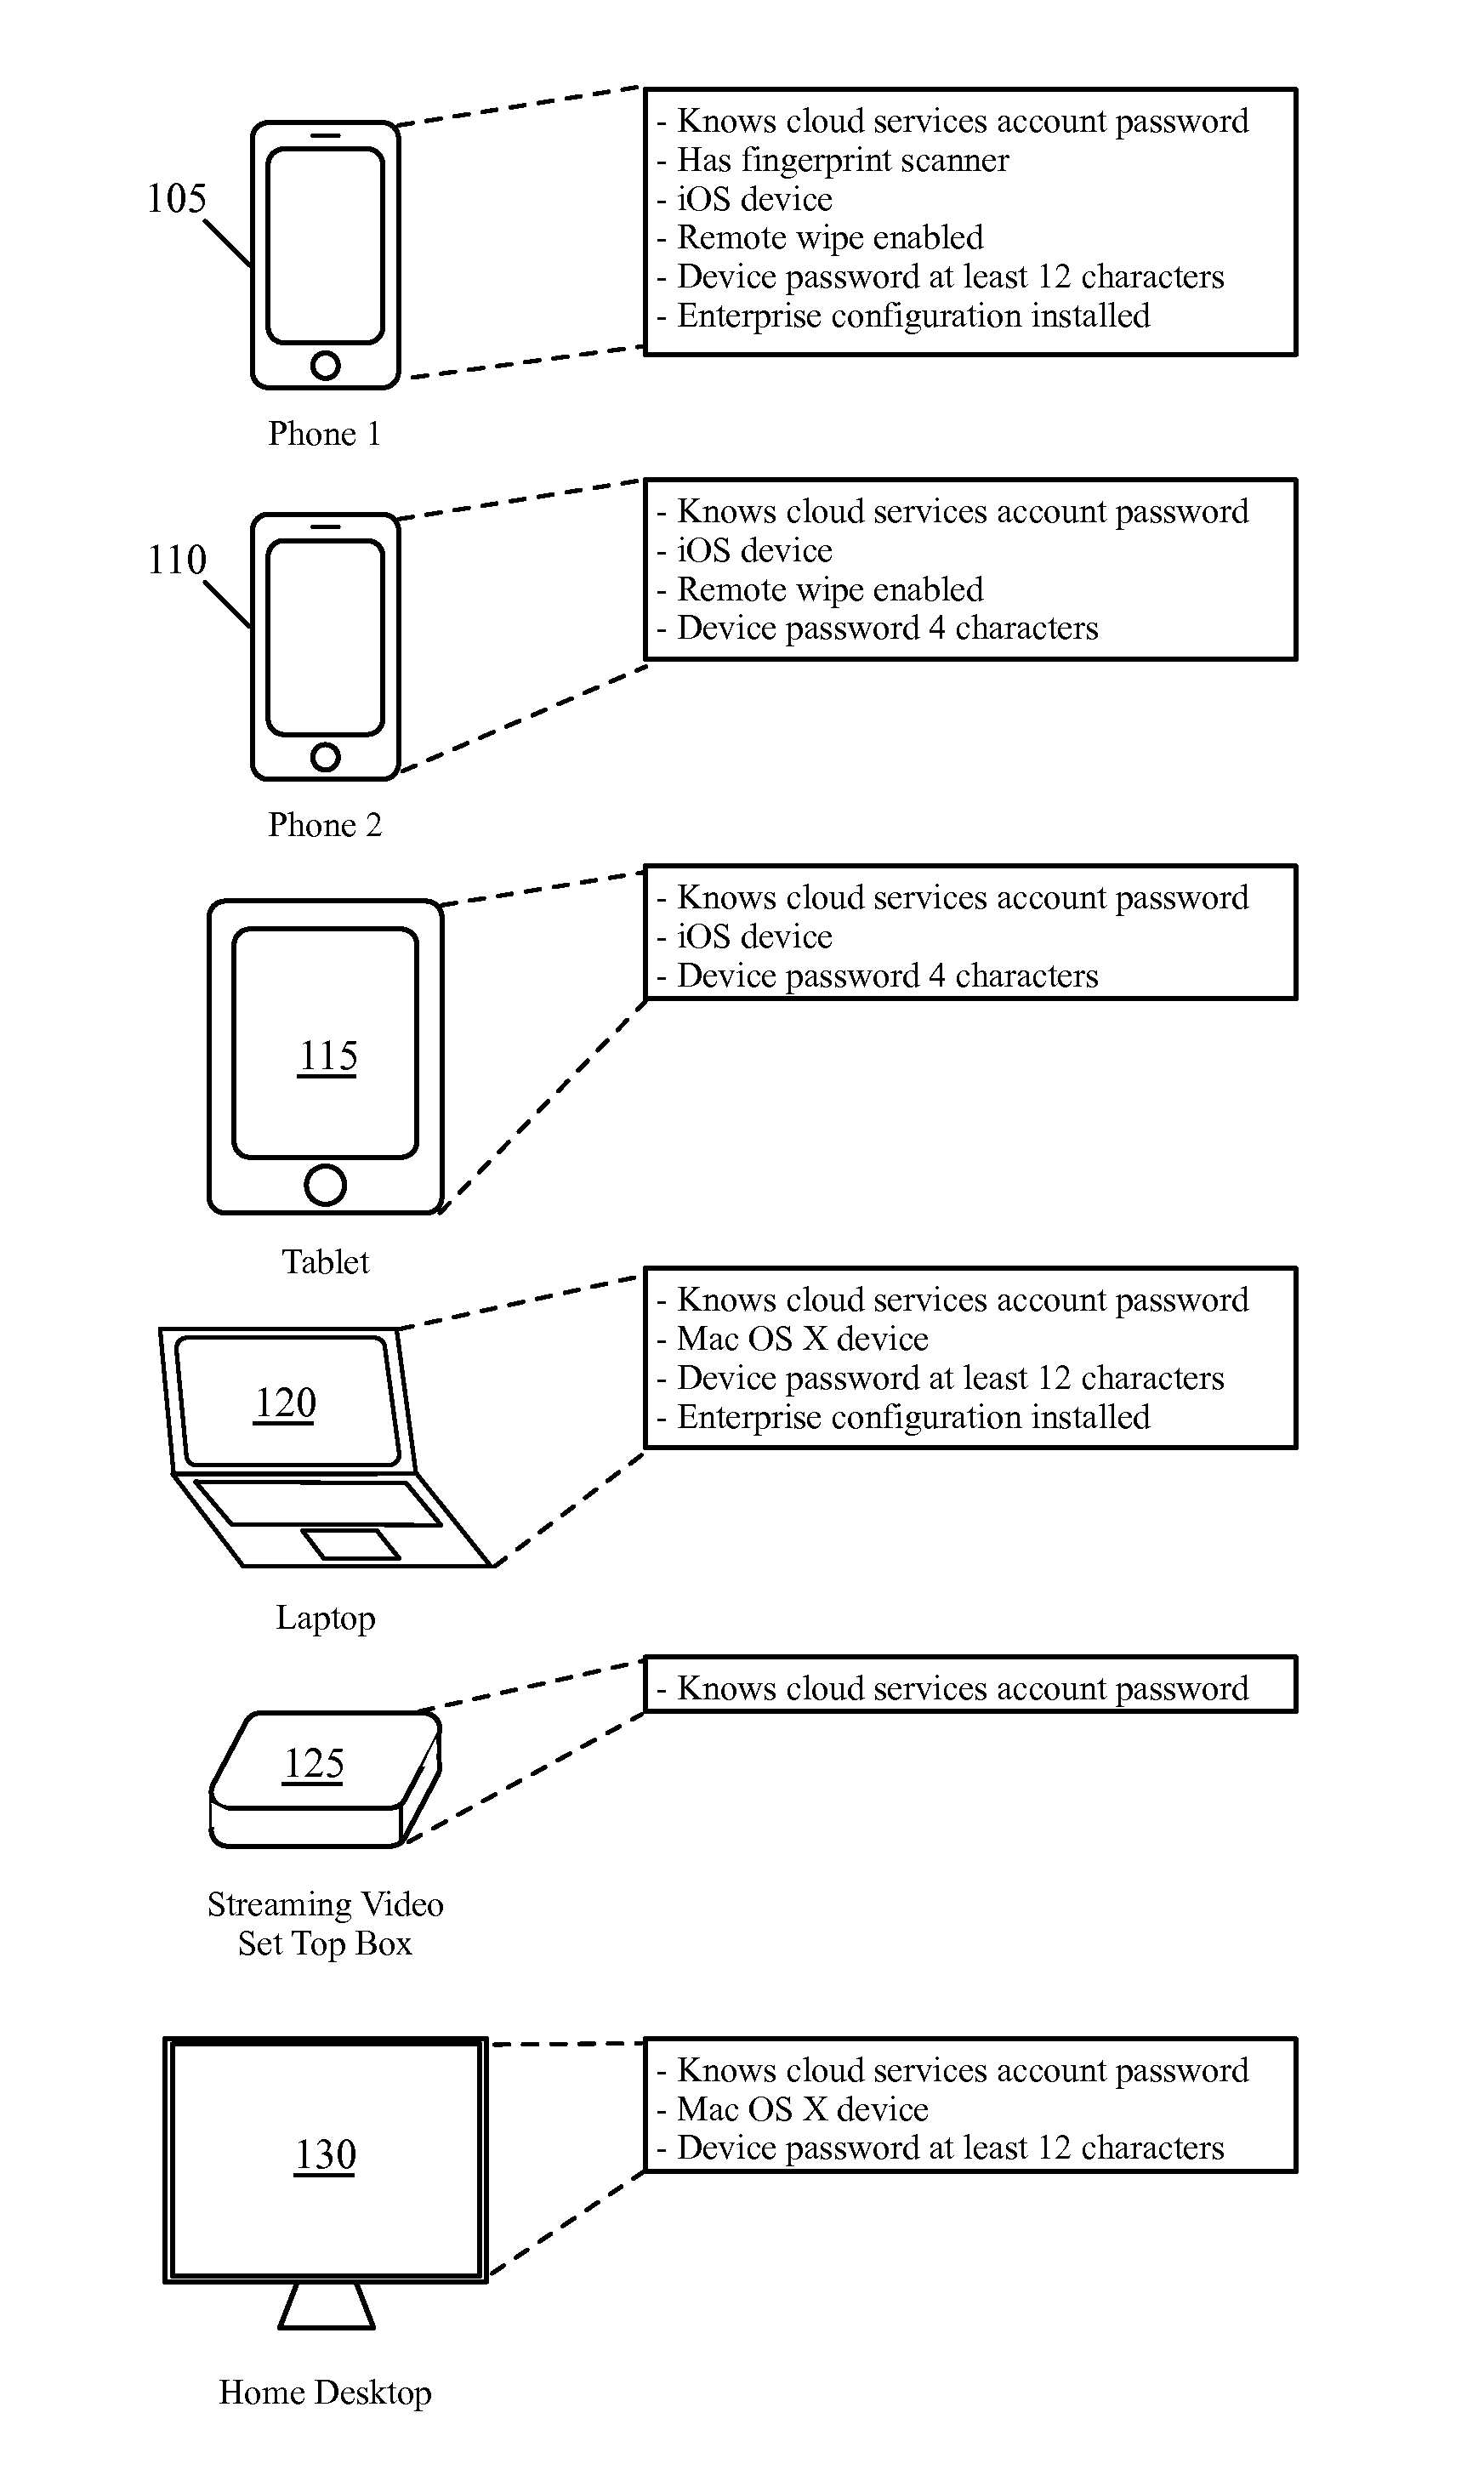 Synchronization And Verification Groups Among Related Devices